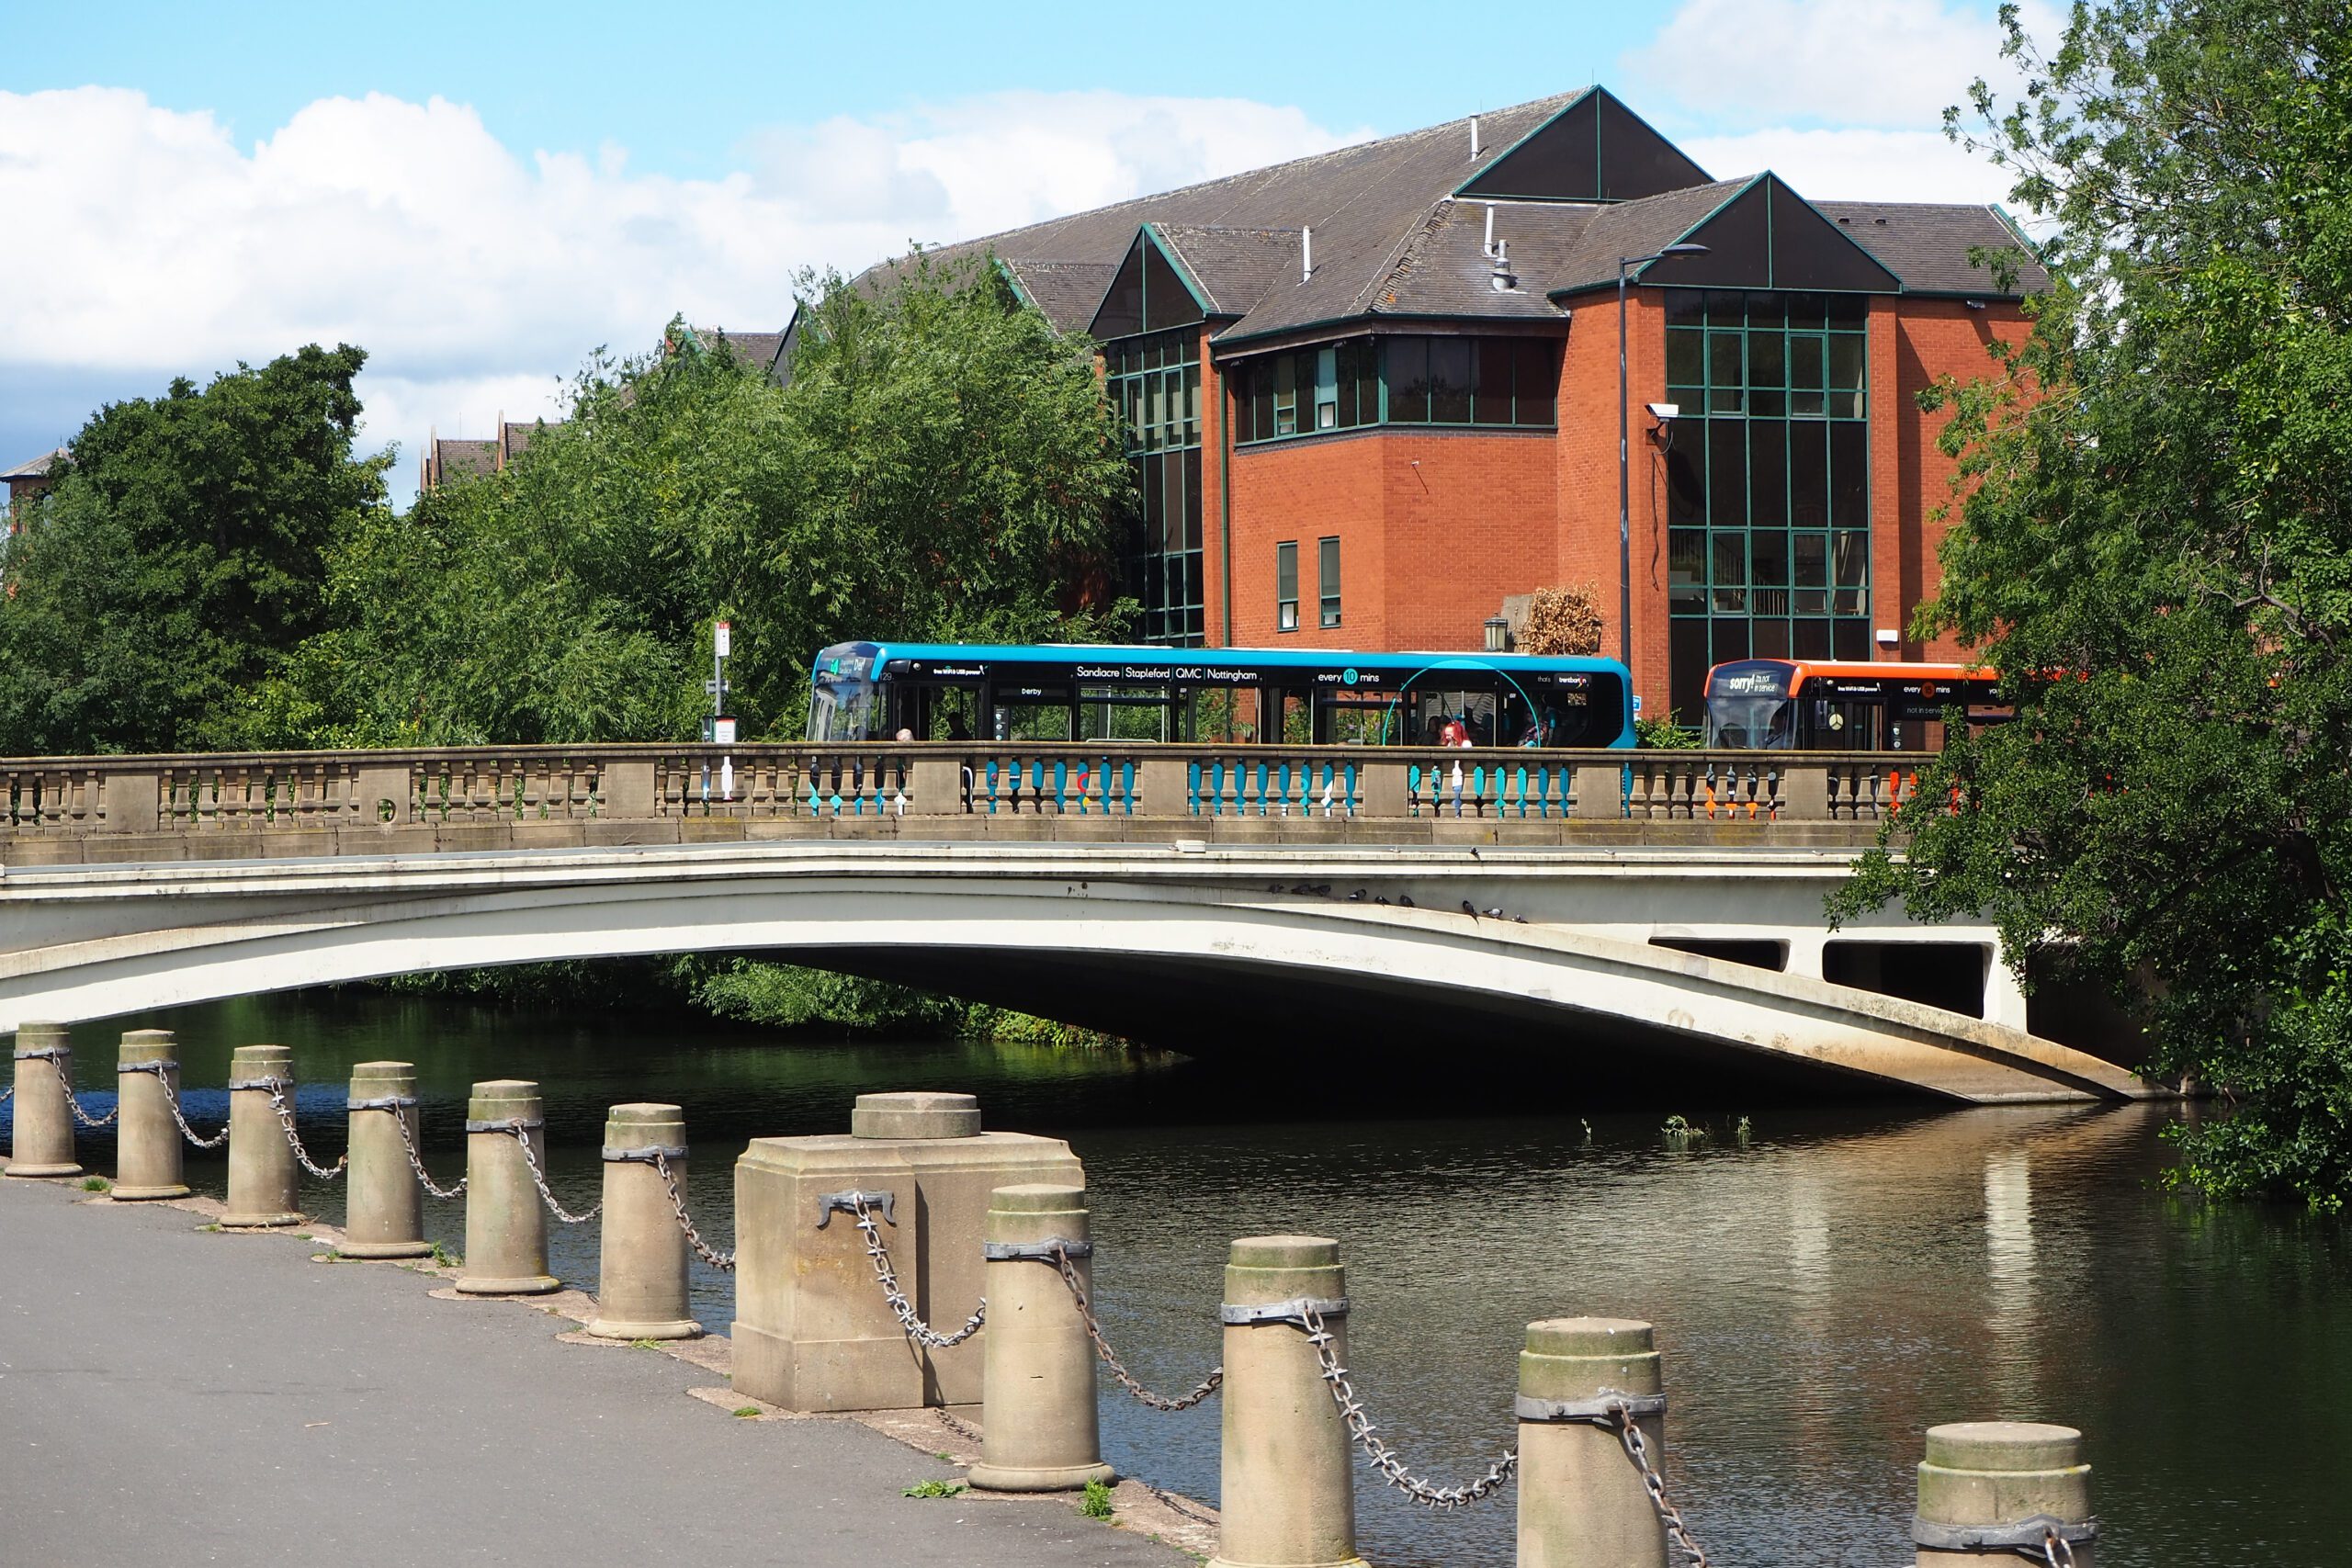 A bus crossing a bridge over the River Derwent in Derby